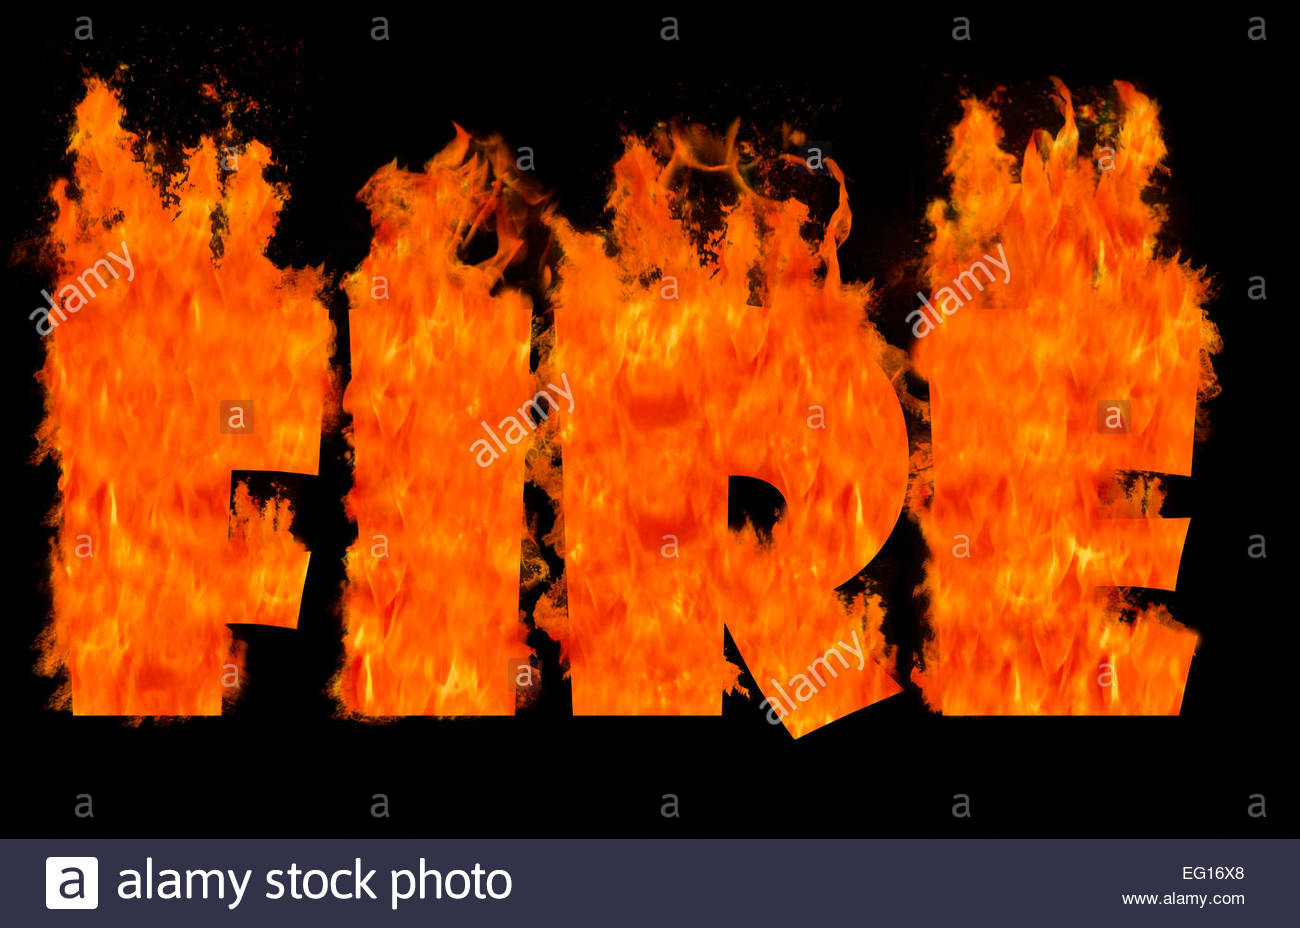 Concept Image Of Flaming Words Hot Burn Fire On Plain Background